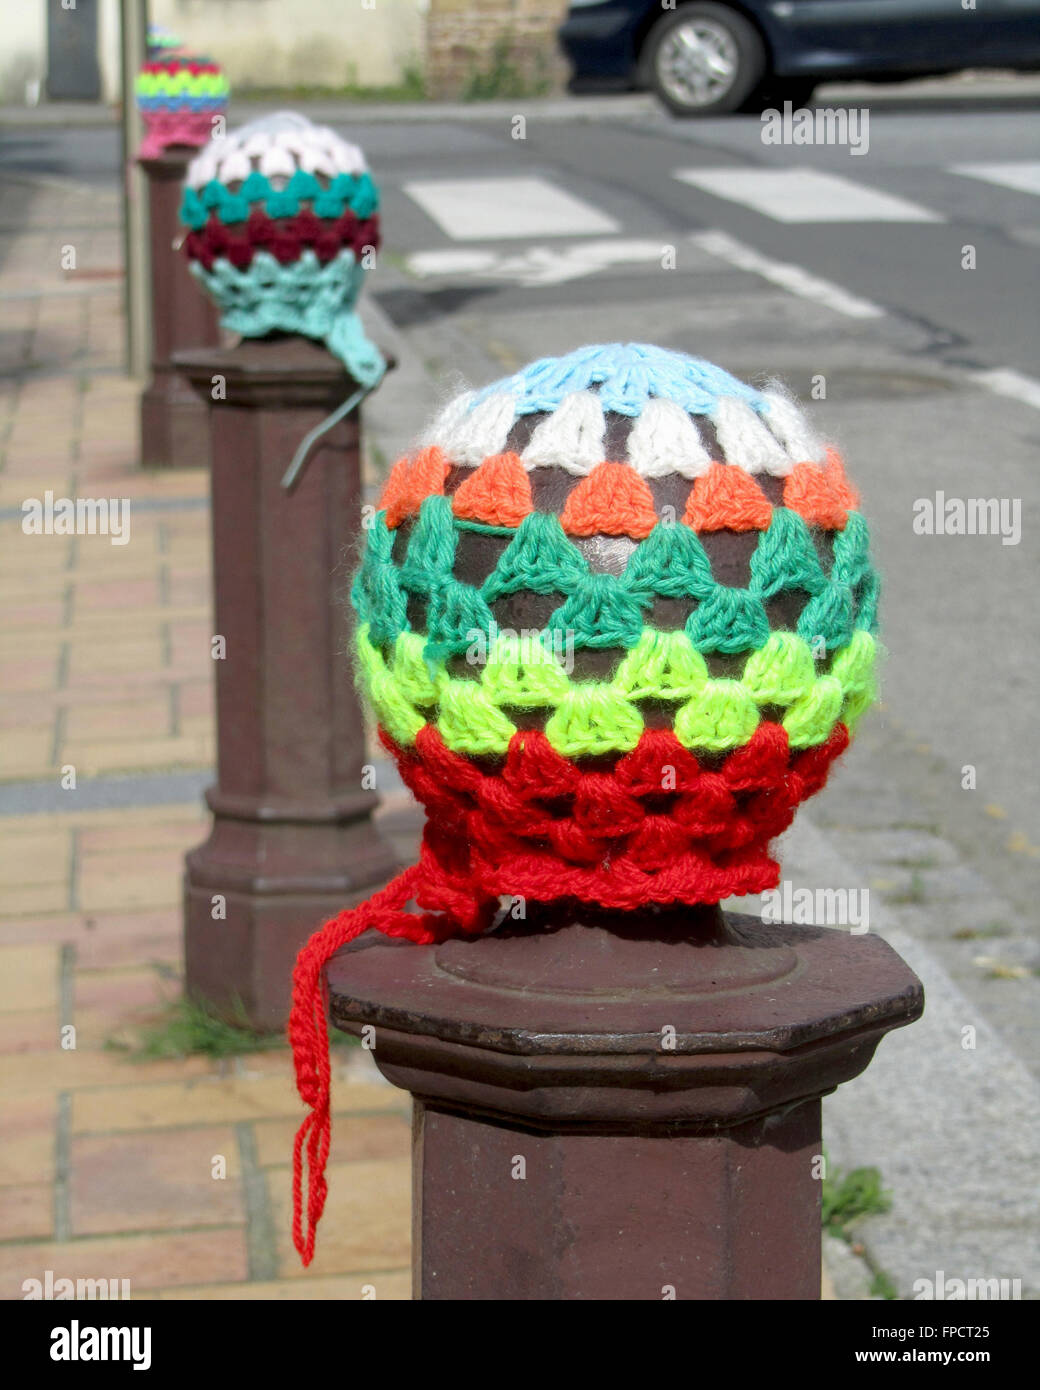 Example of the craze of 'Urban Knitting' also known as 'Yarn Bombing', used by knitting enthusiasts to brighten up urban spaces. Stock Photo